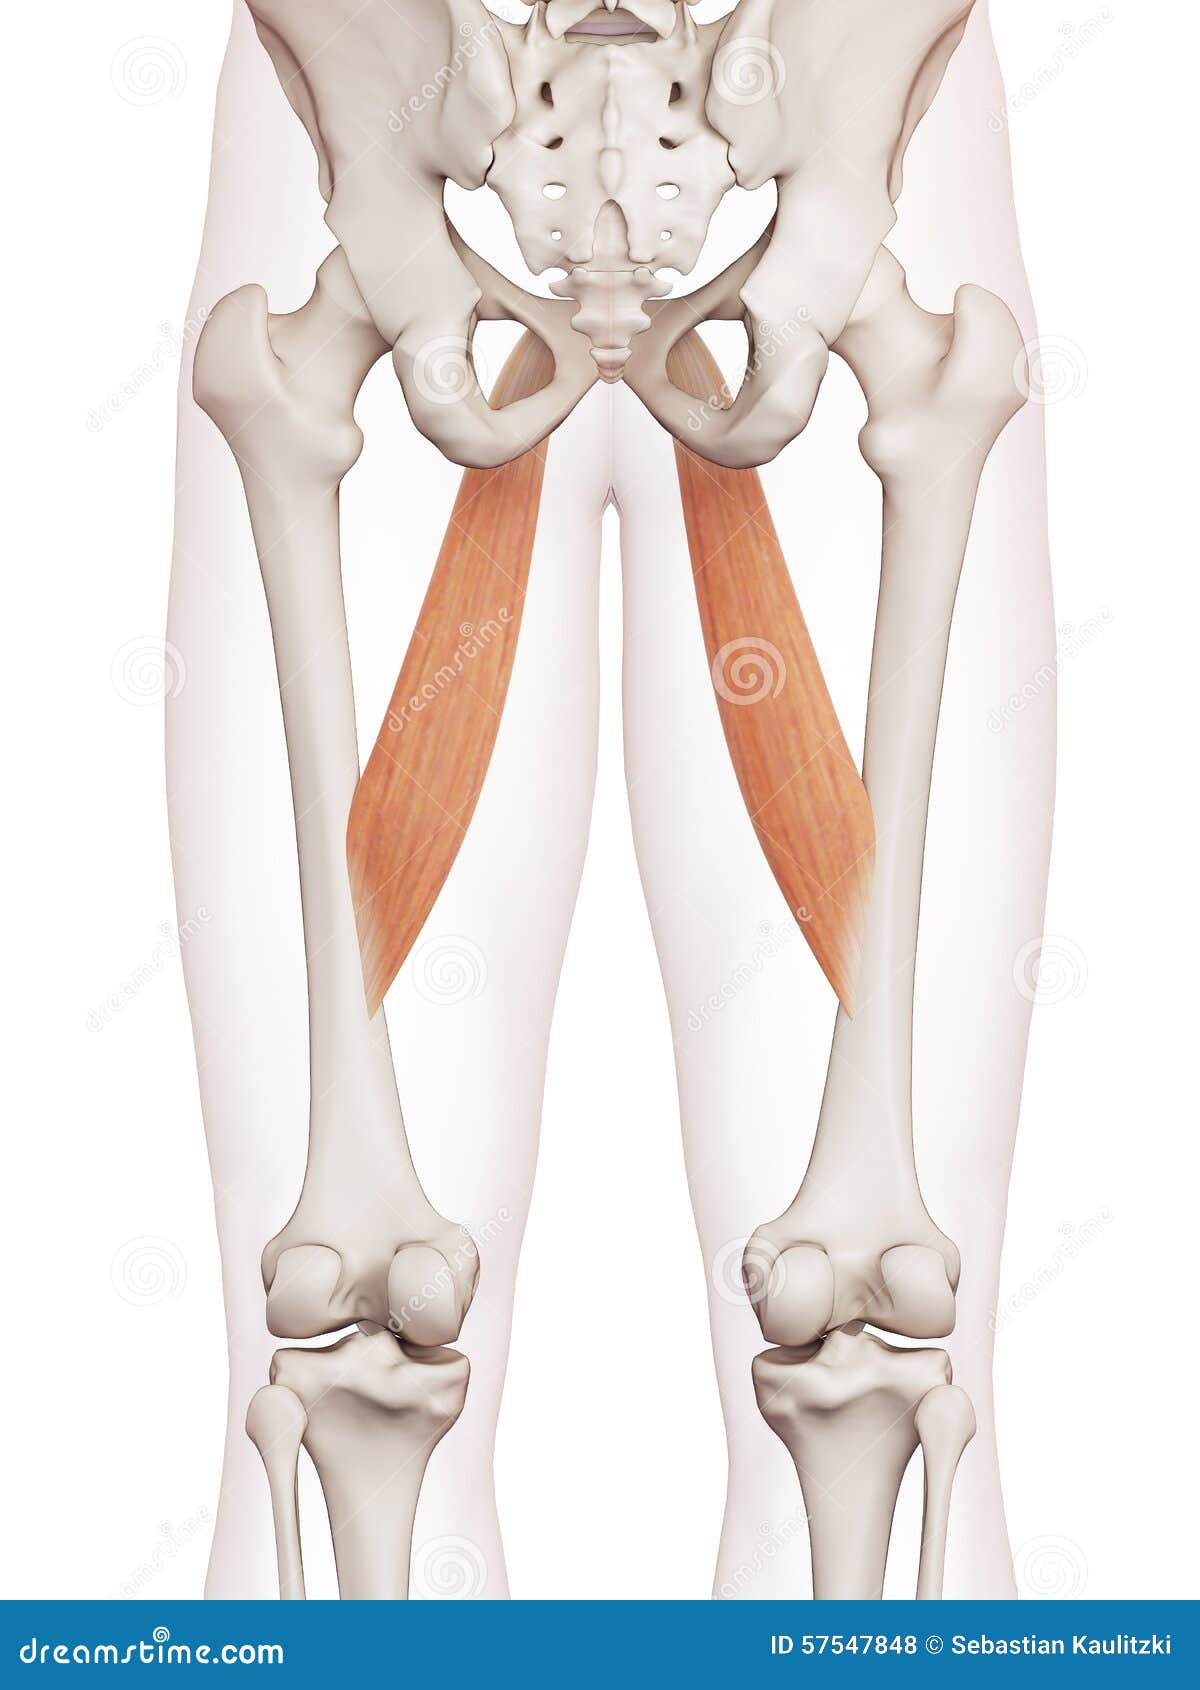 the adductor longus